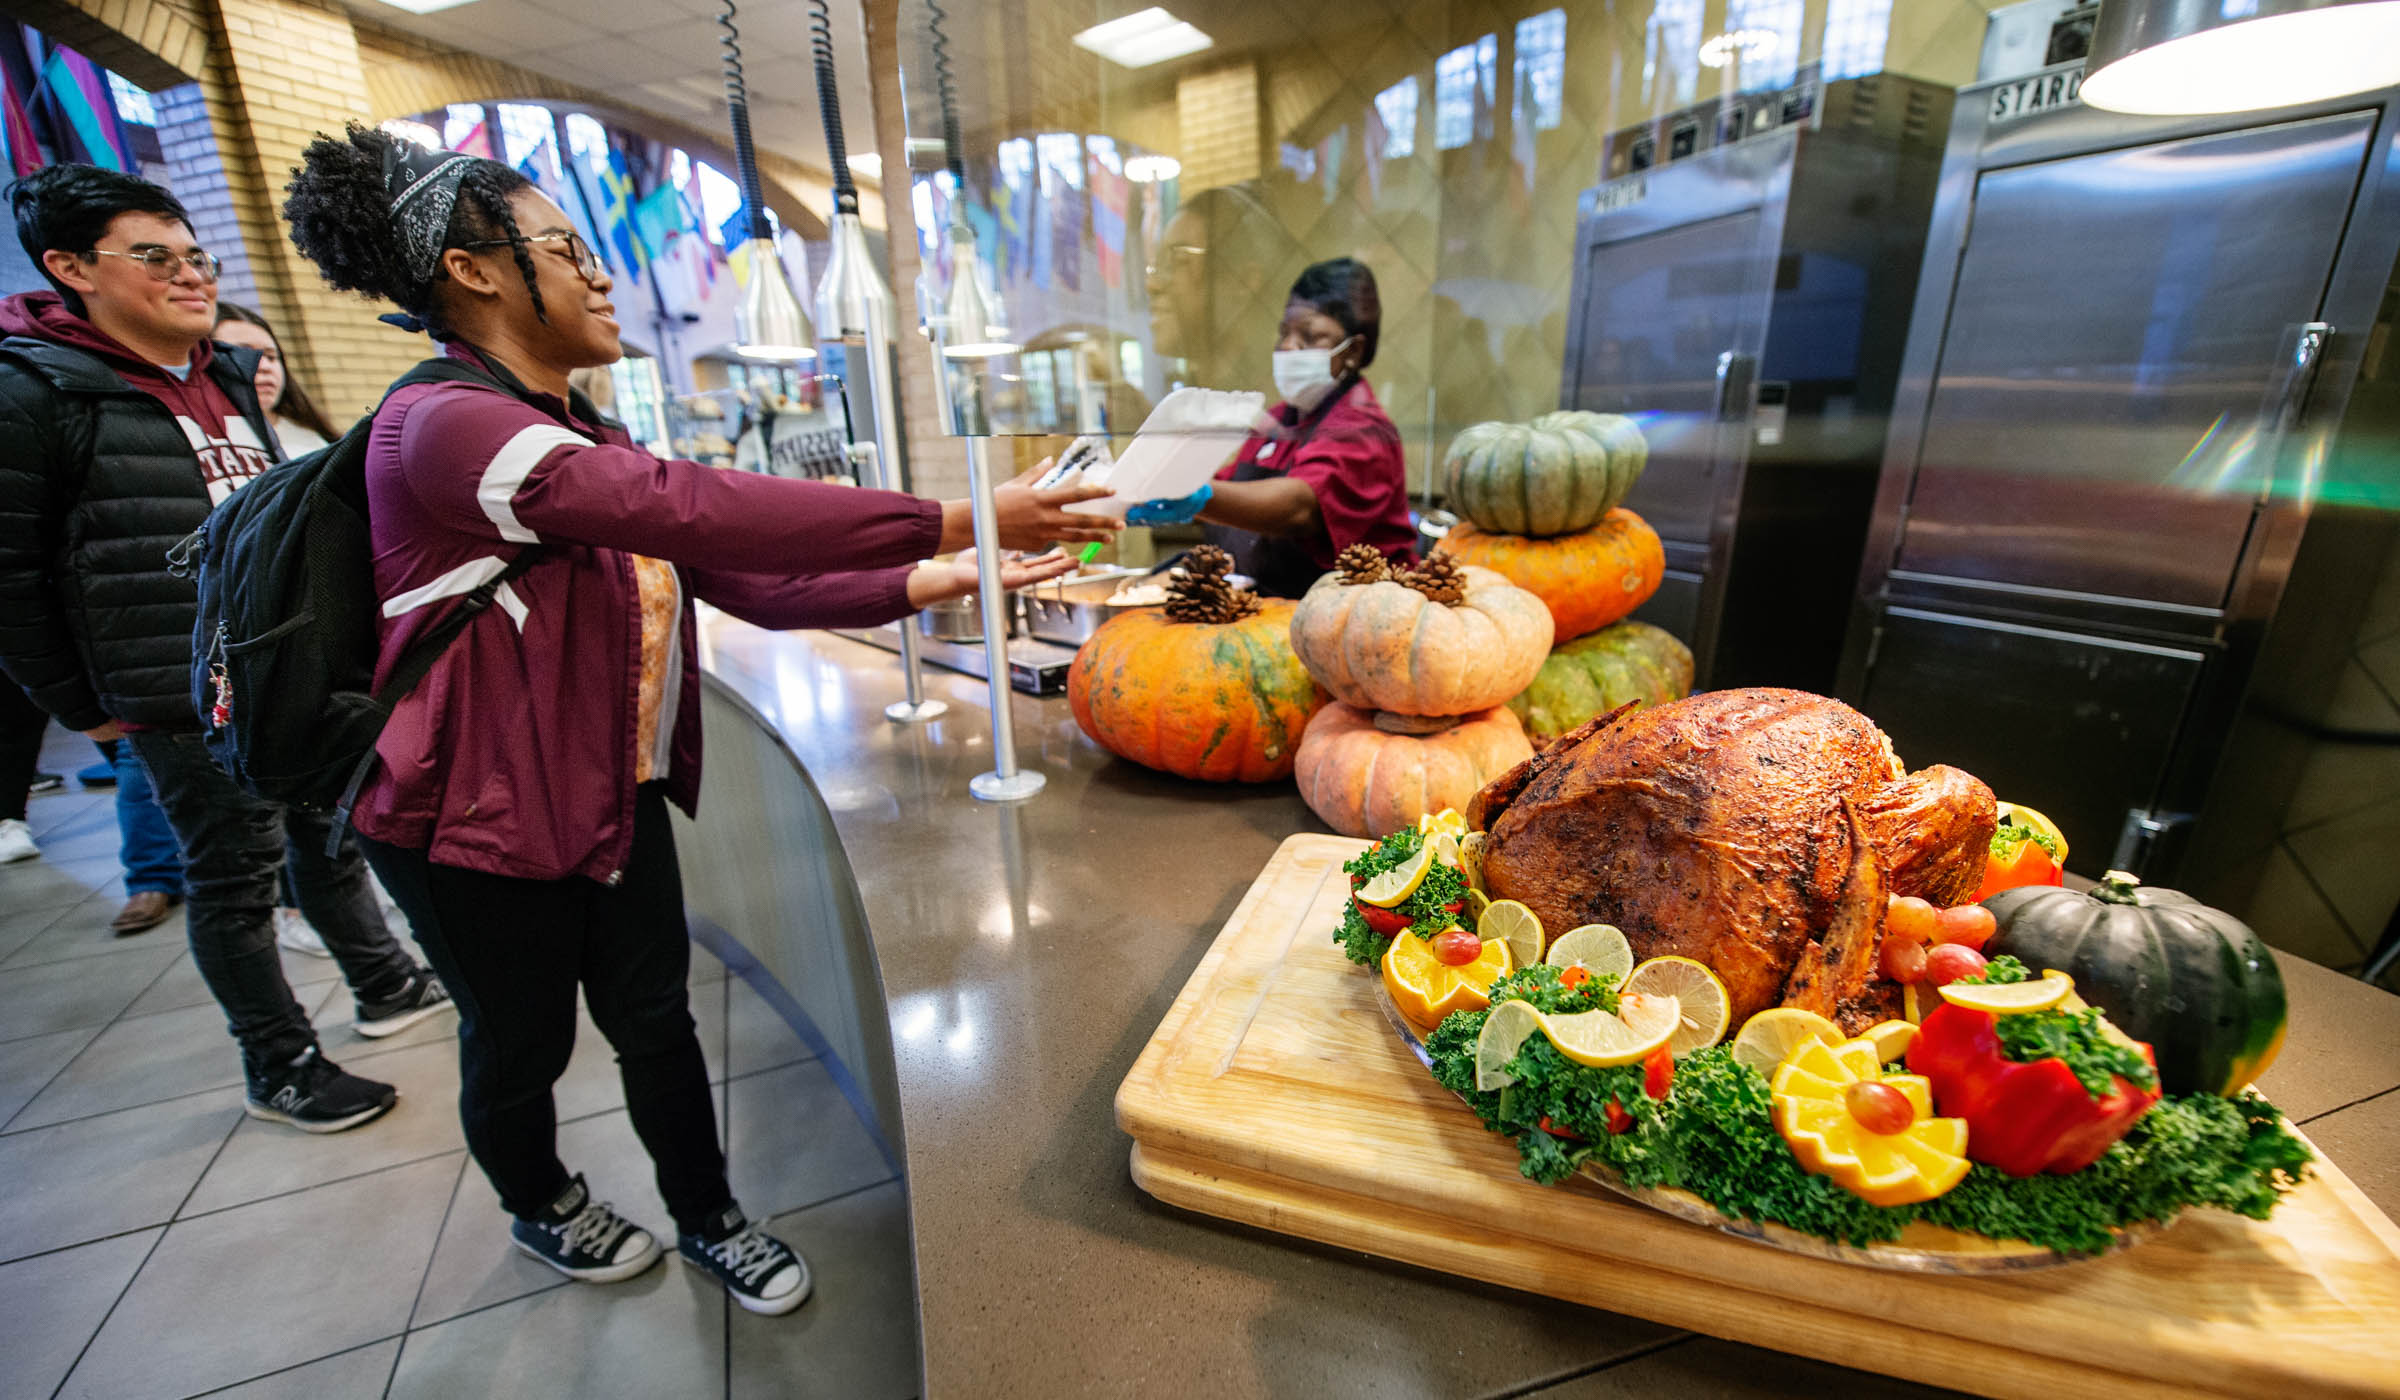 Students line up in the Thanksgiving food line at Perry, with a full roasted turkey in the right foreground.